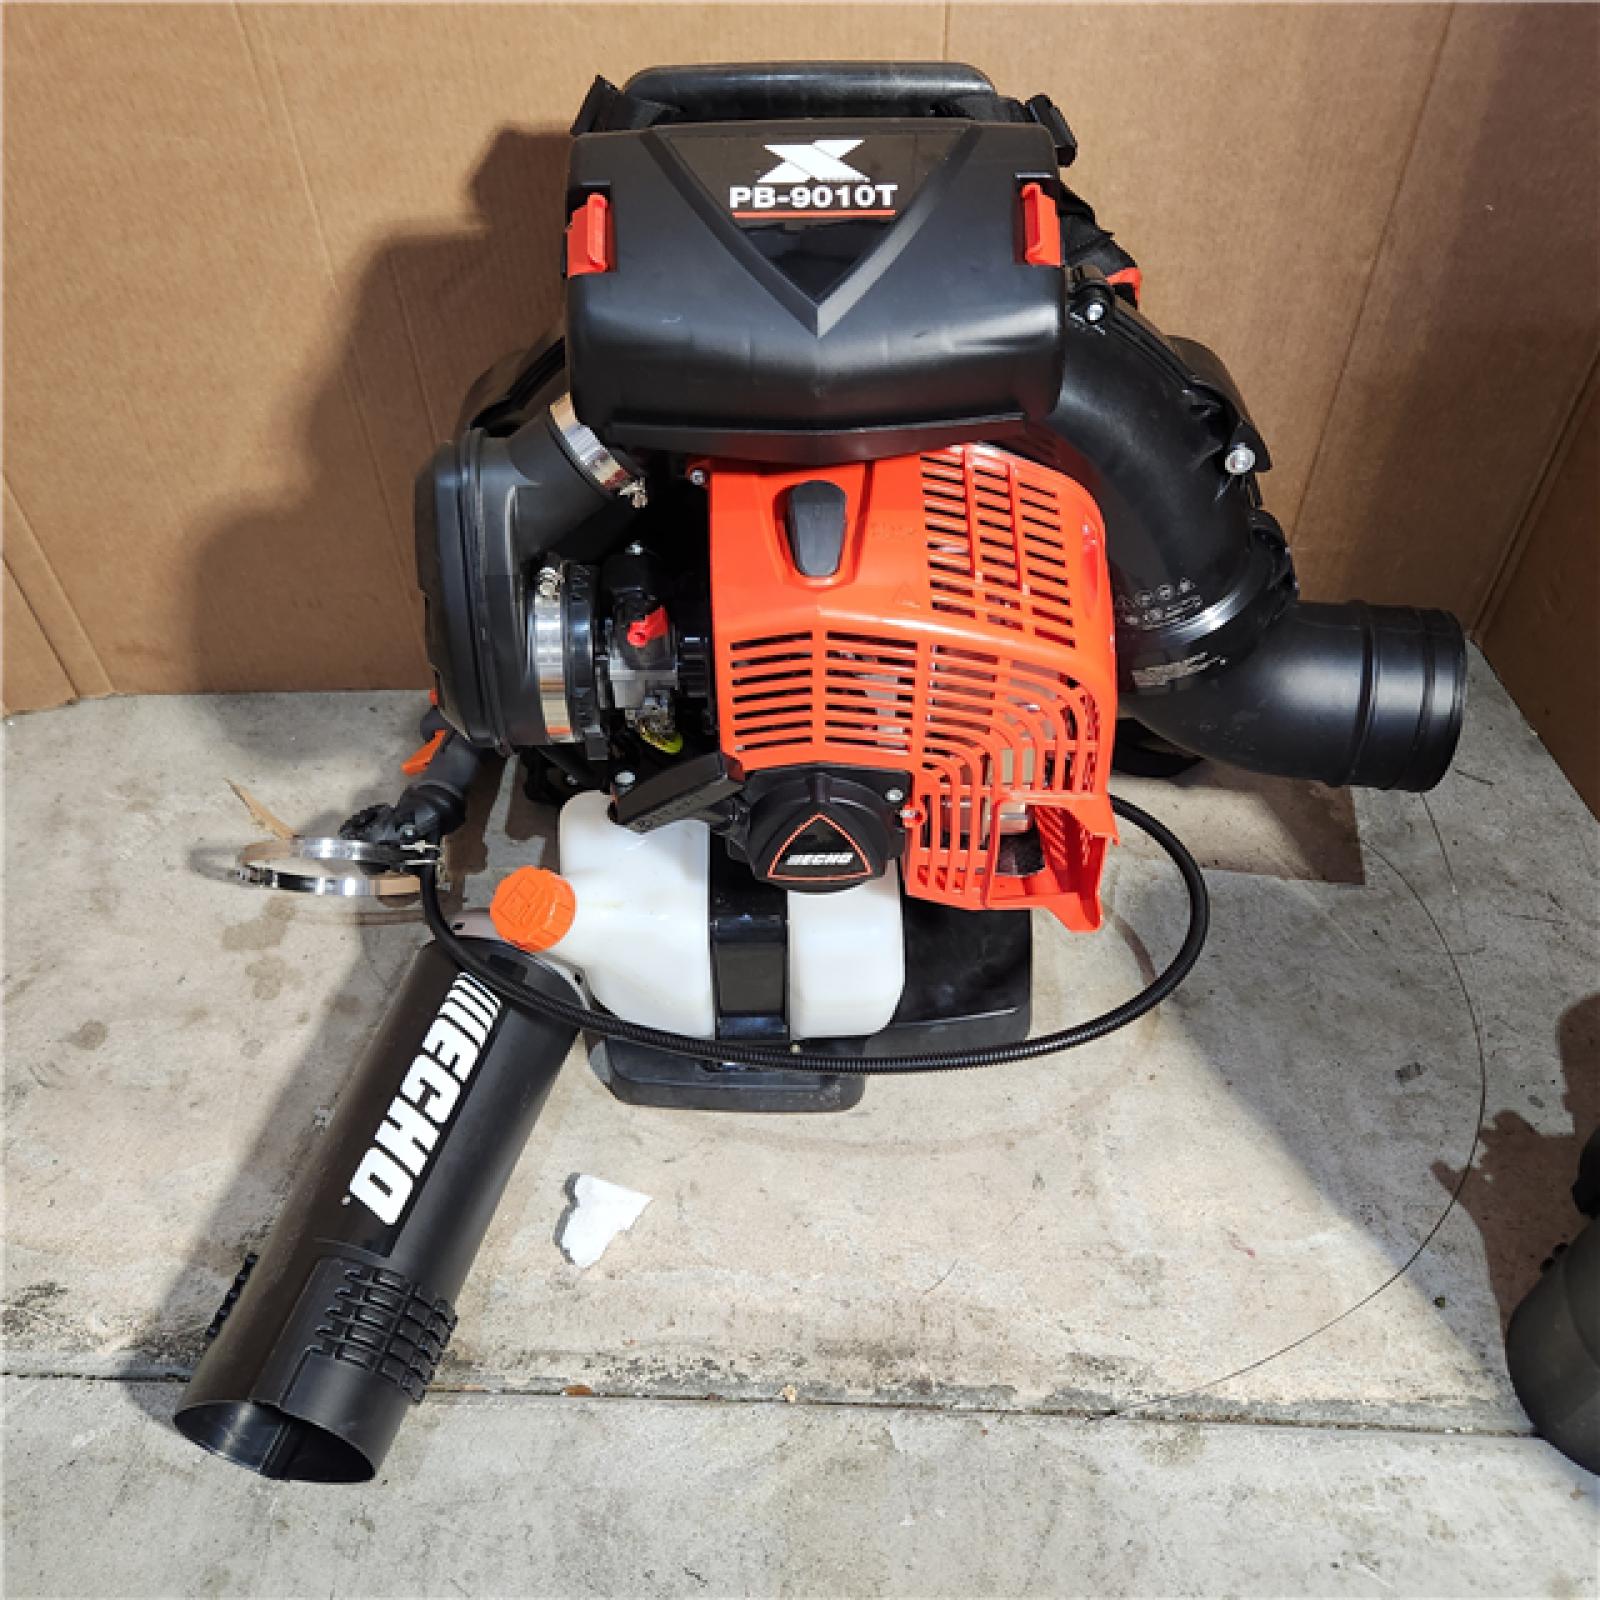 Houston location AS-IS ECHO 220 MPH 1110 CFM 79.9 Cc Gas 2-Stroke X Series Backpack Blower with Tube-Mounted Throttle